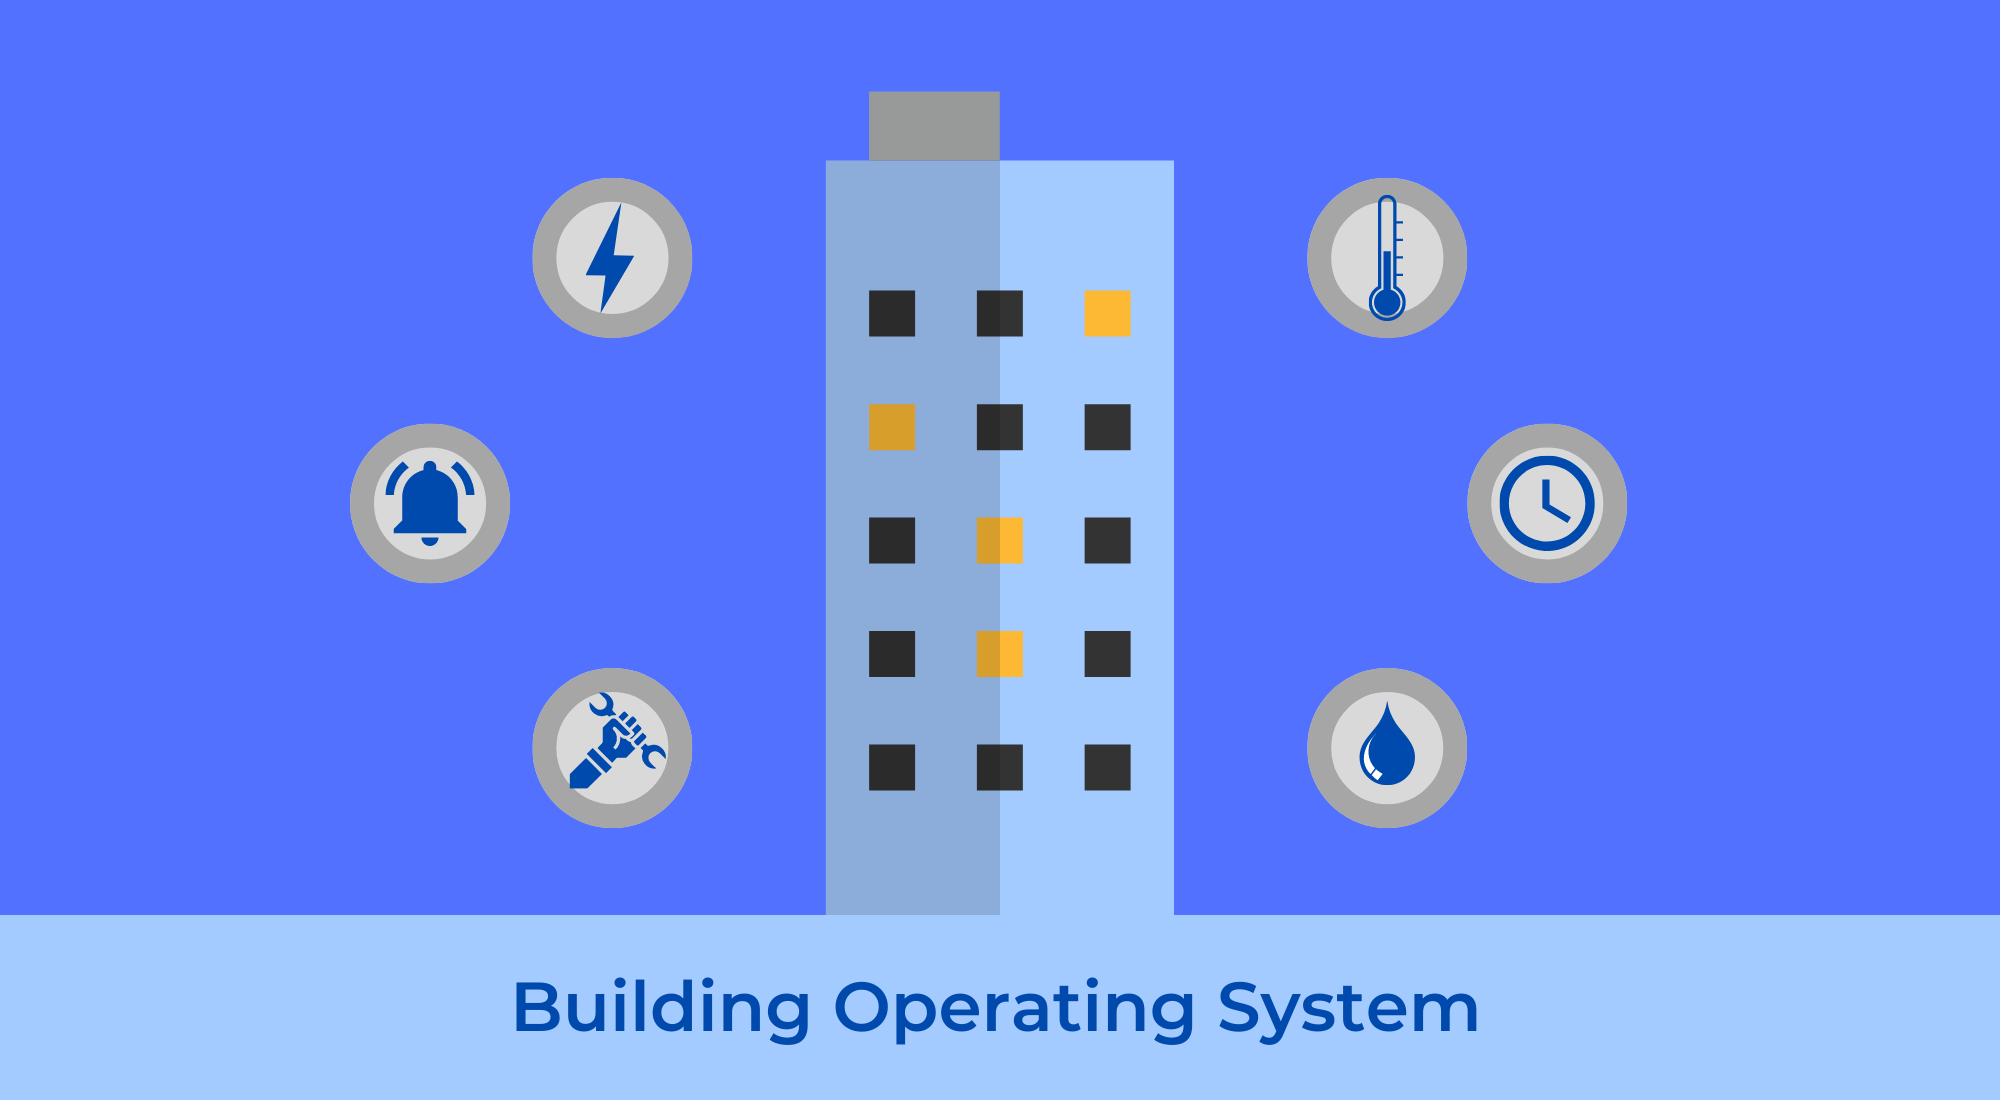 Why is a building operating system essential for making buildings "smart"